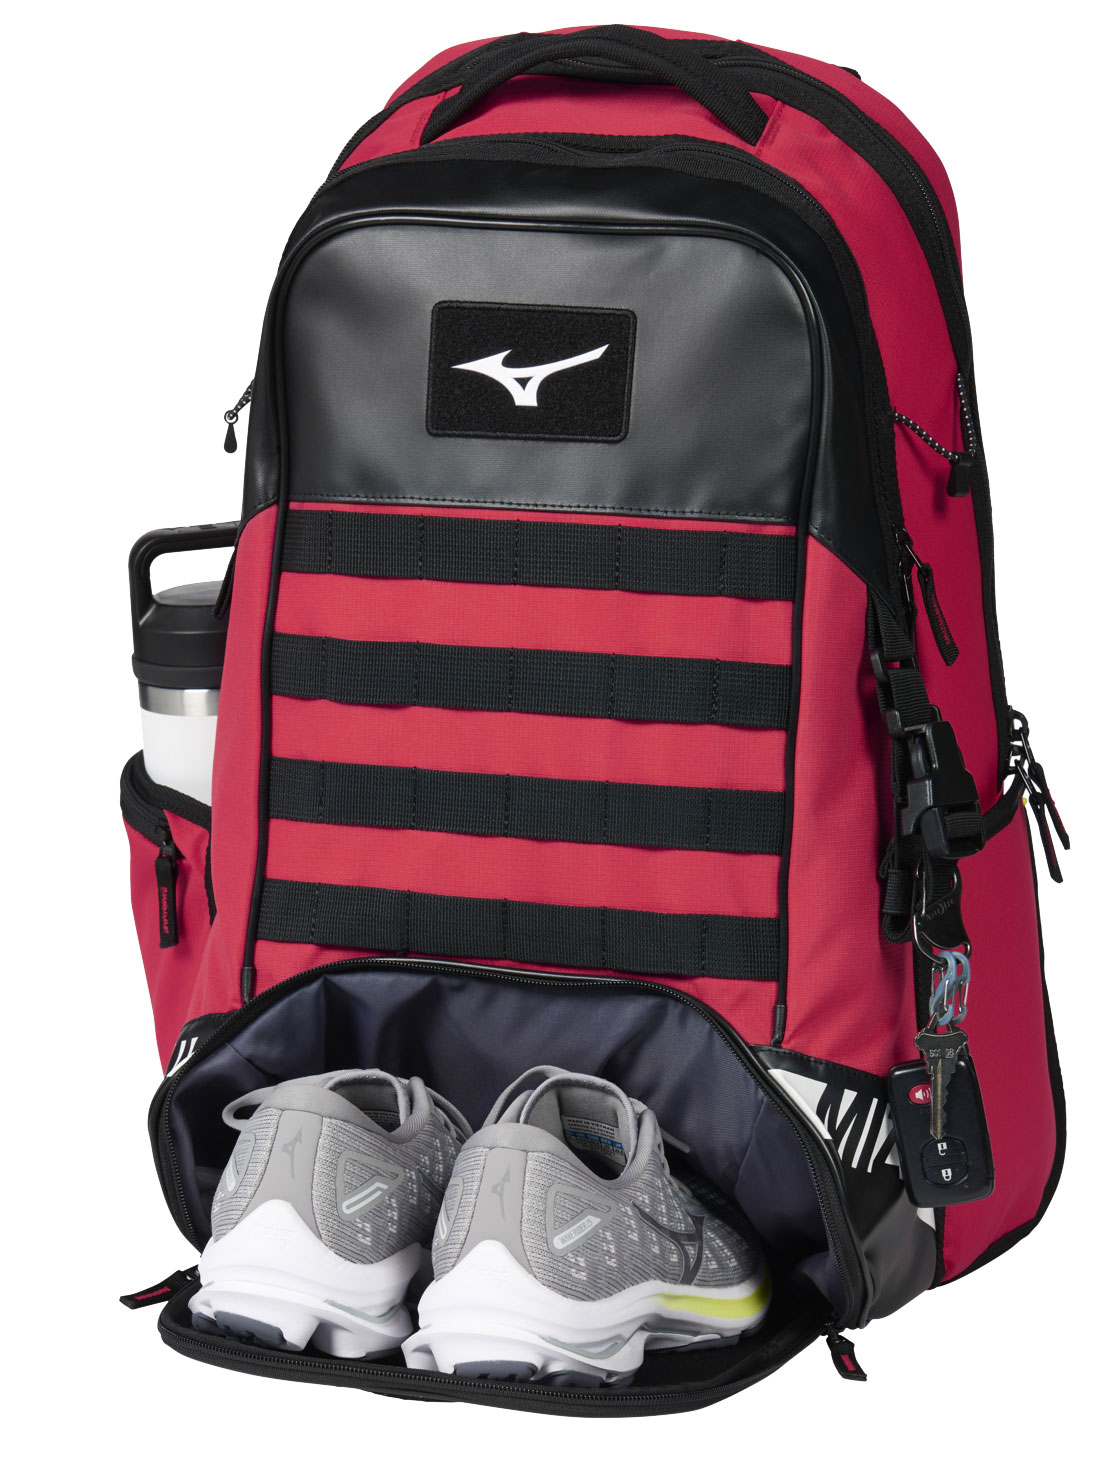 American Flag SOCCER Ball Bag or USA Volleyball Backpack -BEST SOCCER GEAR  BAGS! | eBay